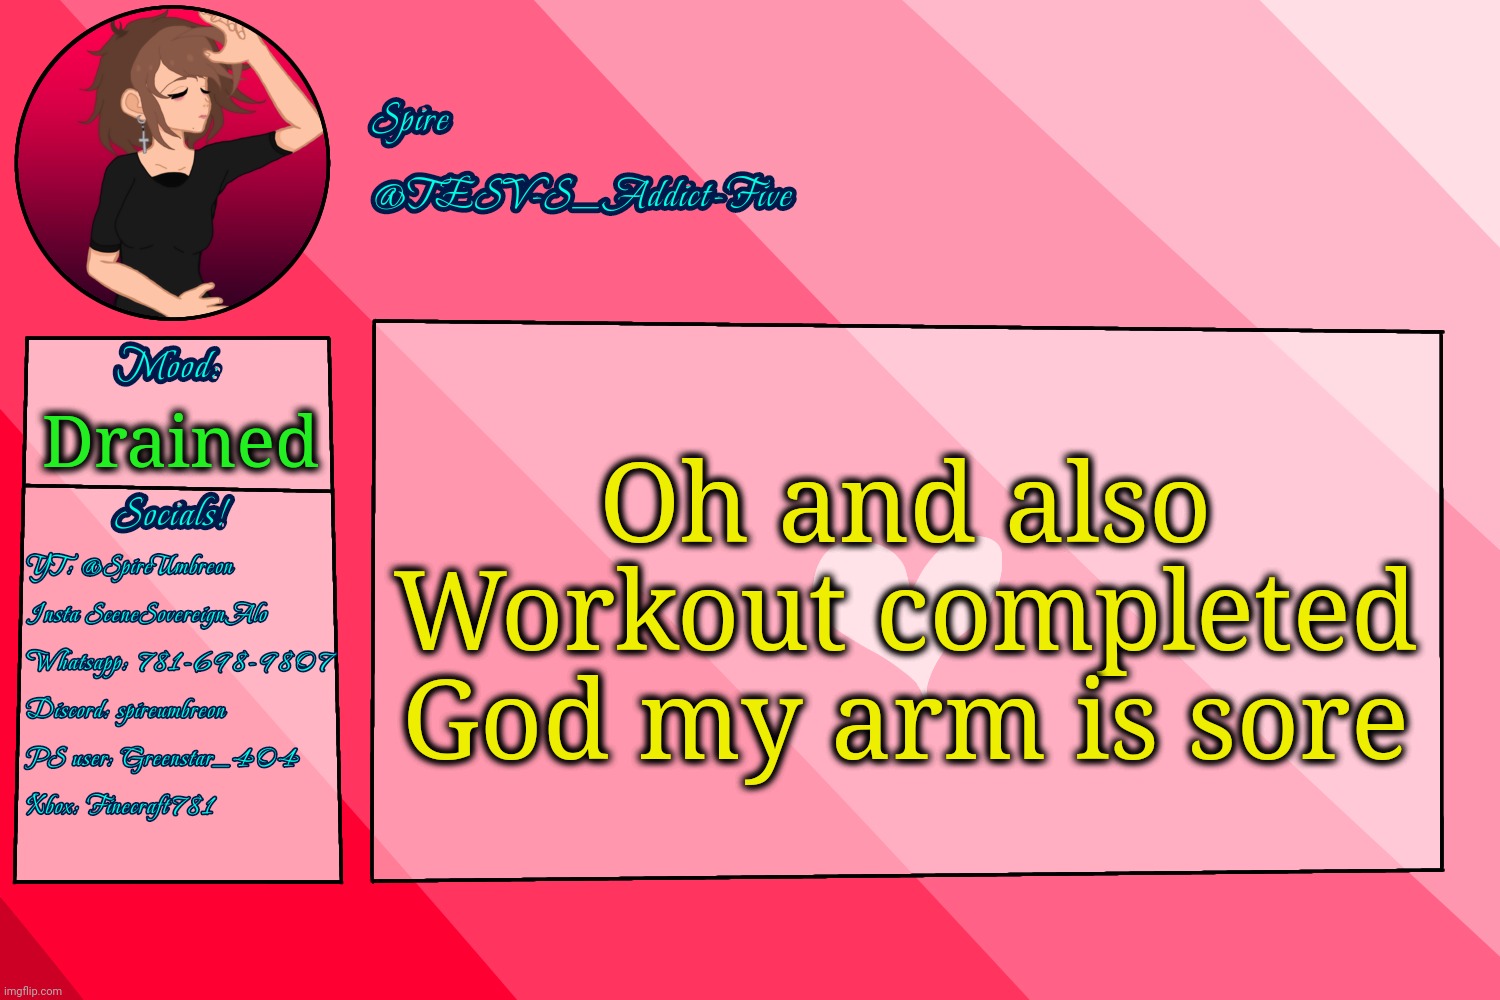 But all for the gains bro | Oh and also
Workout completed
God my arm is sore; Drained | image tagged in tesv-s_addict-five announcement template | made w/ Imgflip meme maker